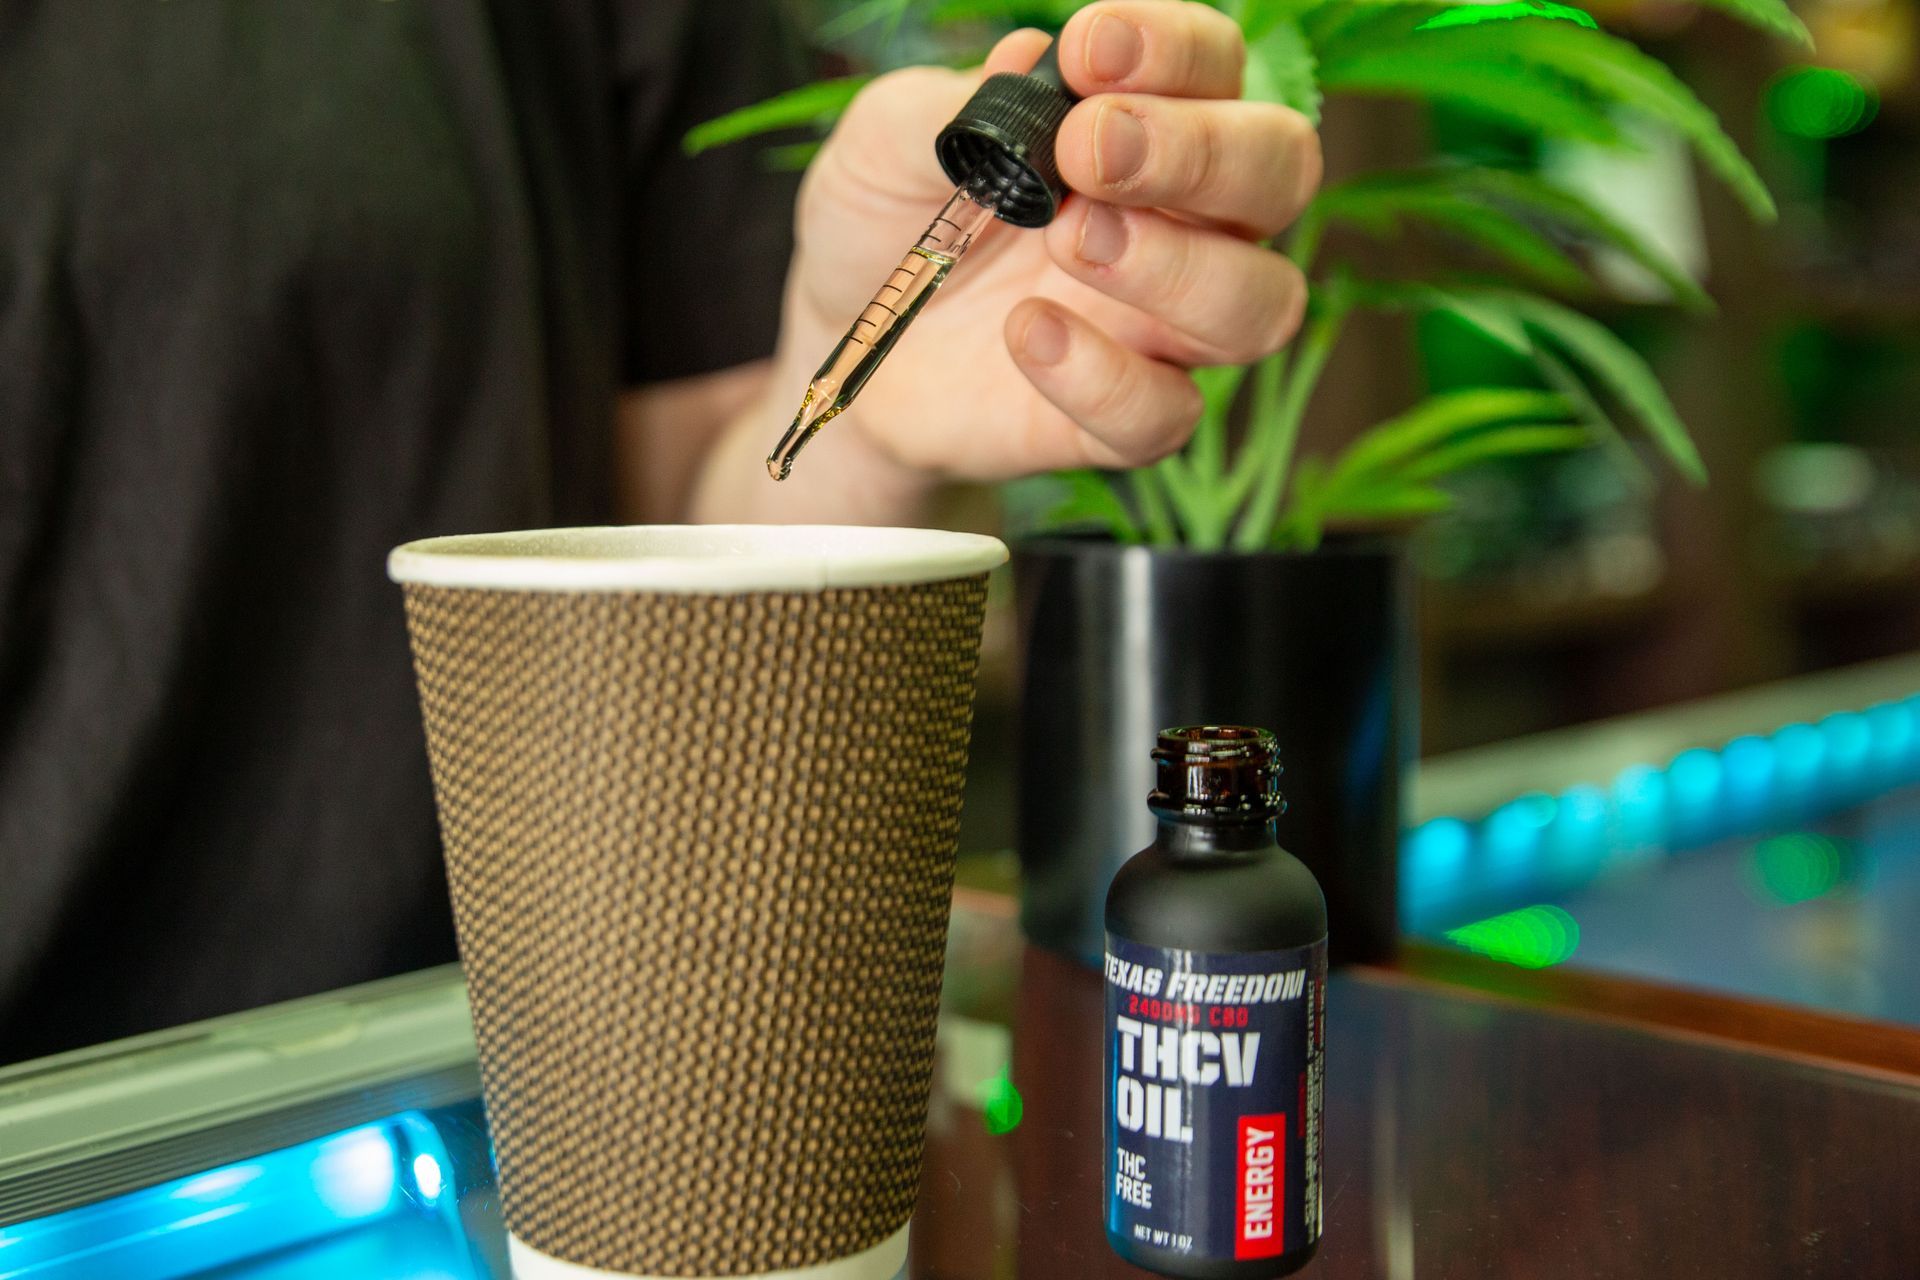 Adding some THCv Oil to a cup of coffee to start the day off right!